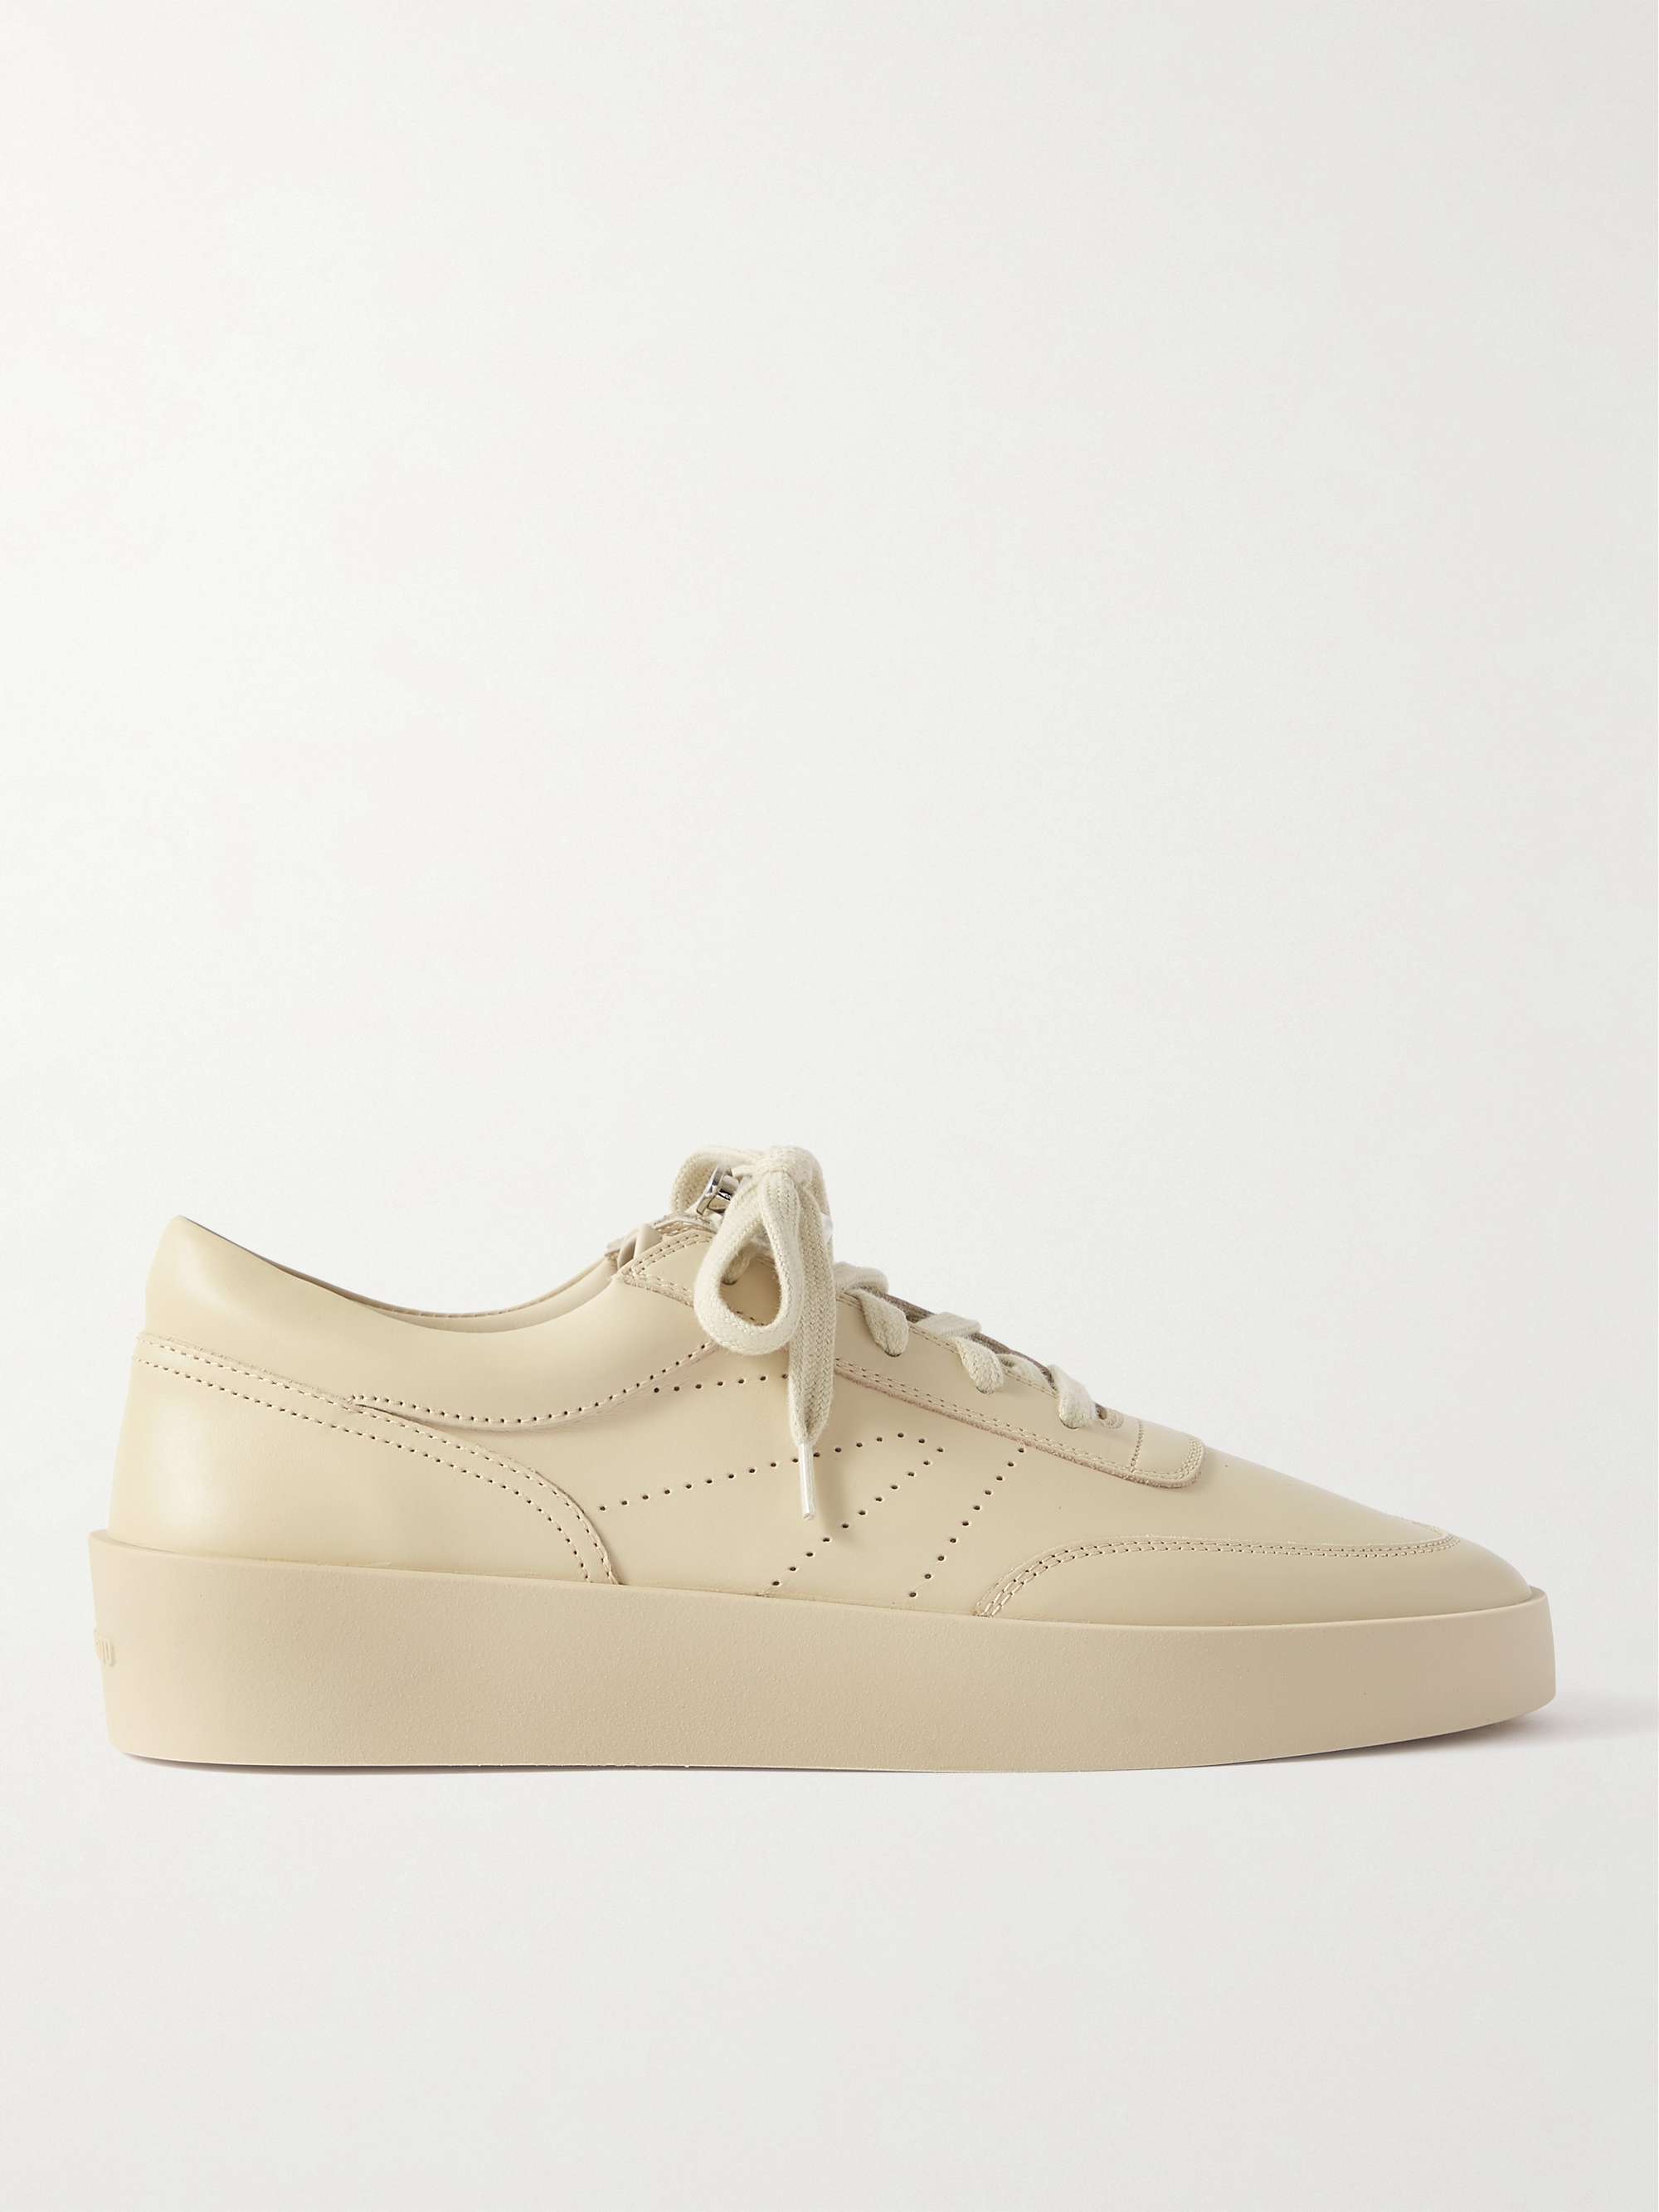 FEAR OF GOD Leather Sneakers